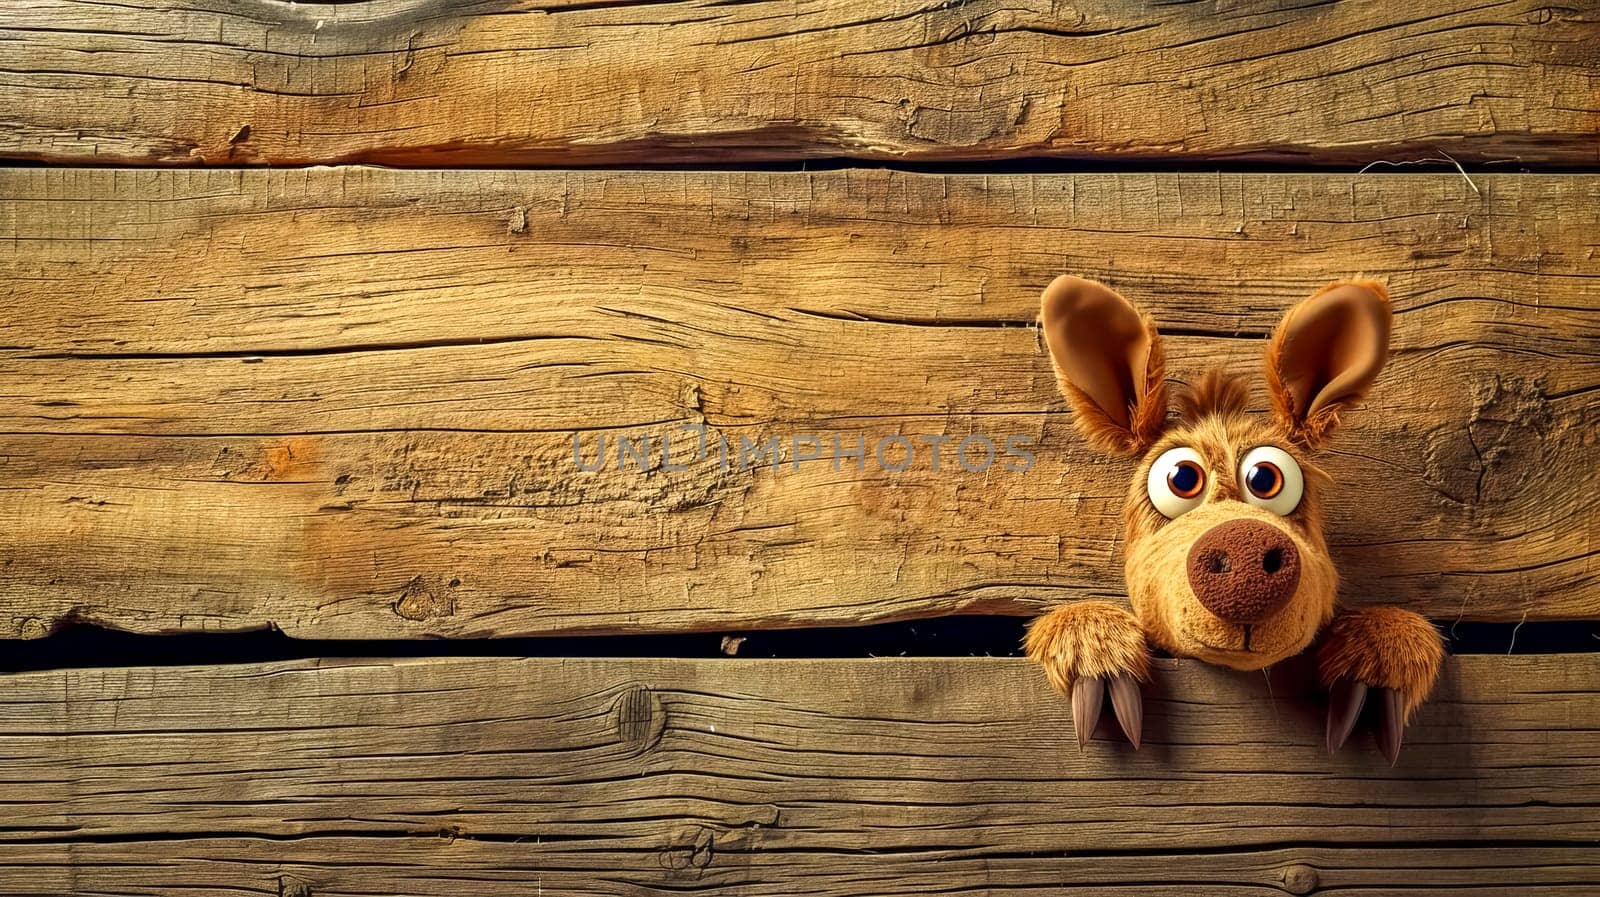 cartoon-like creature peeking through wooden planks, with a playful and curious expression, set against a rustic wooden backdrop. by Edophoto